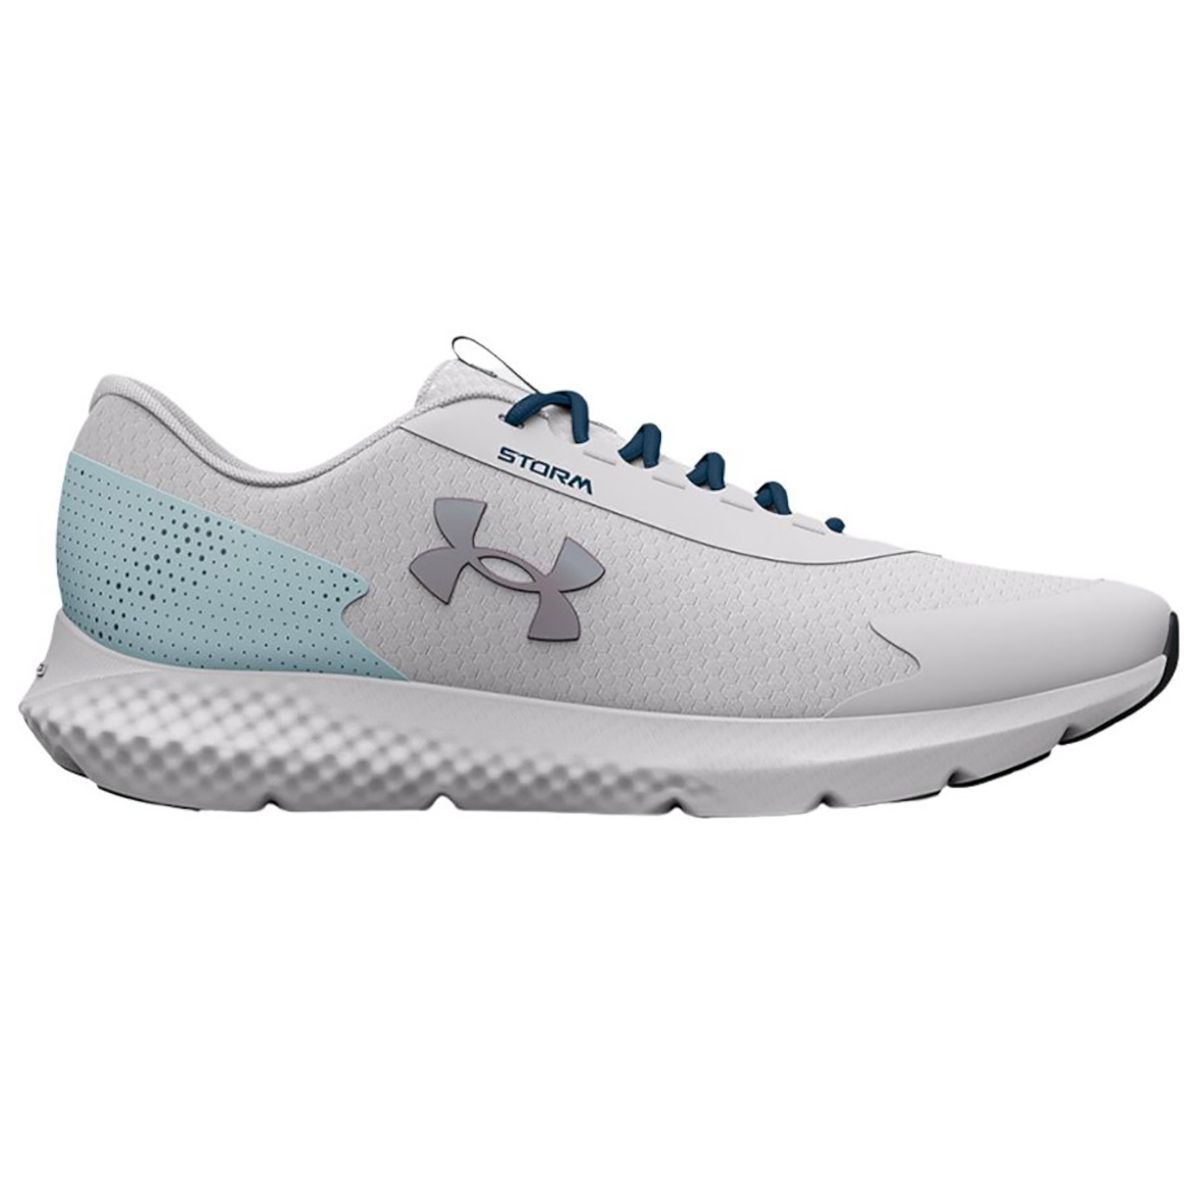 Under Armour Charged Rogue 3 Storm Women's Running Shoes 302